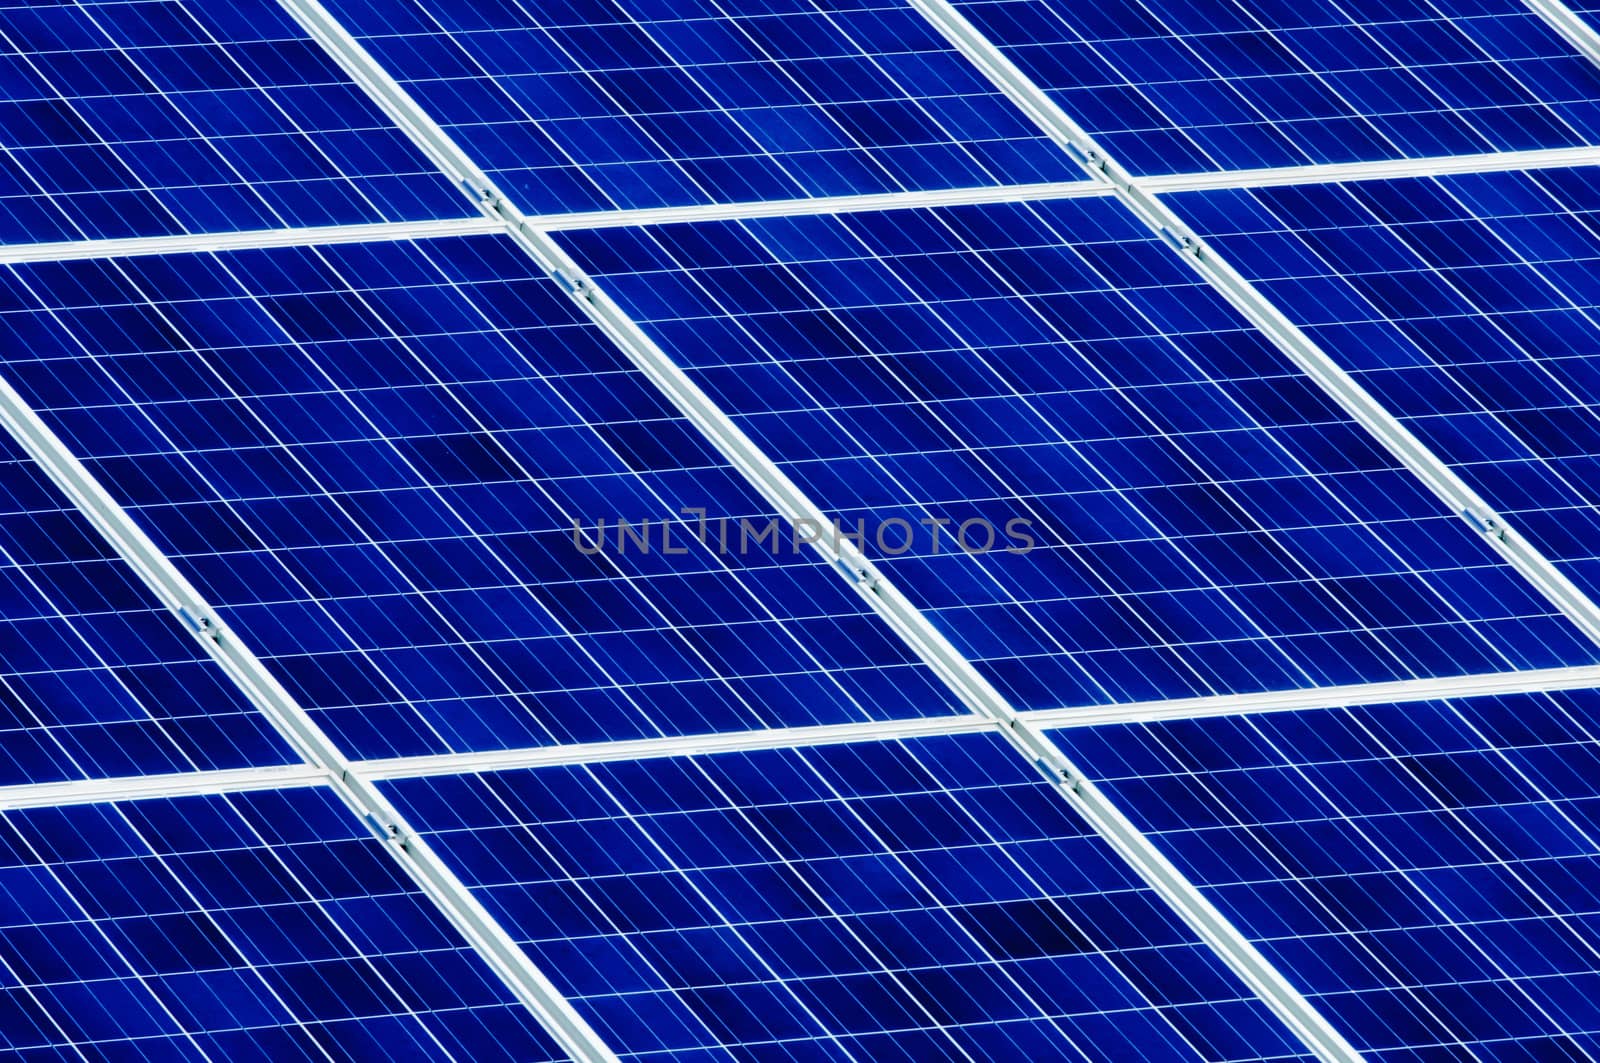 Photovoltaic solar cell panels as renewable energy source